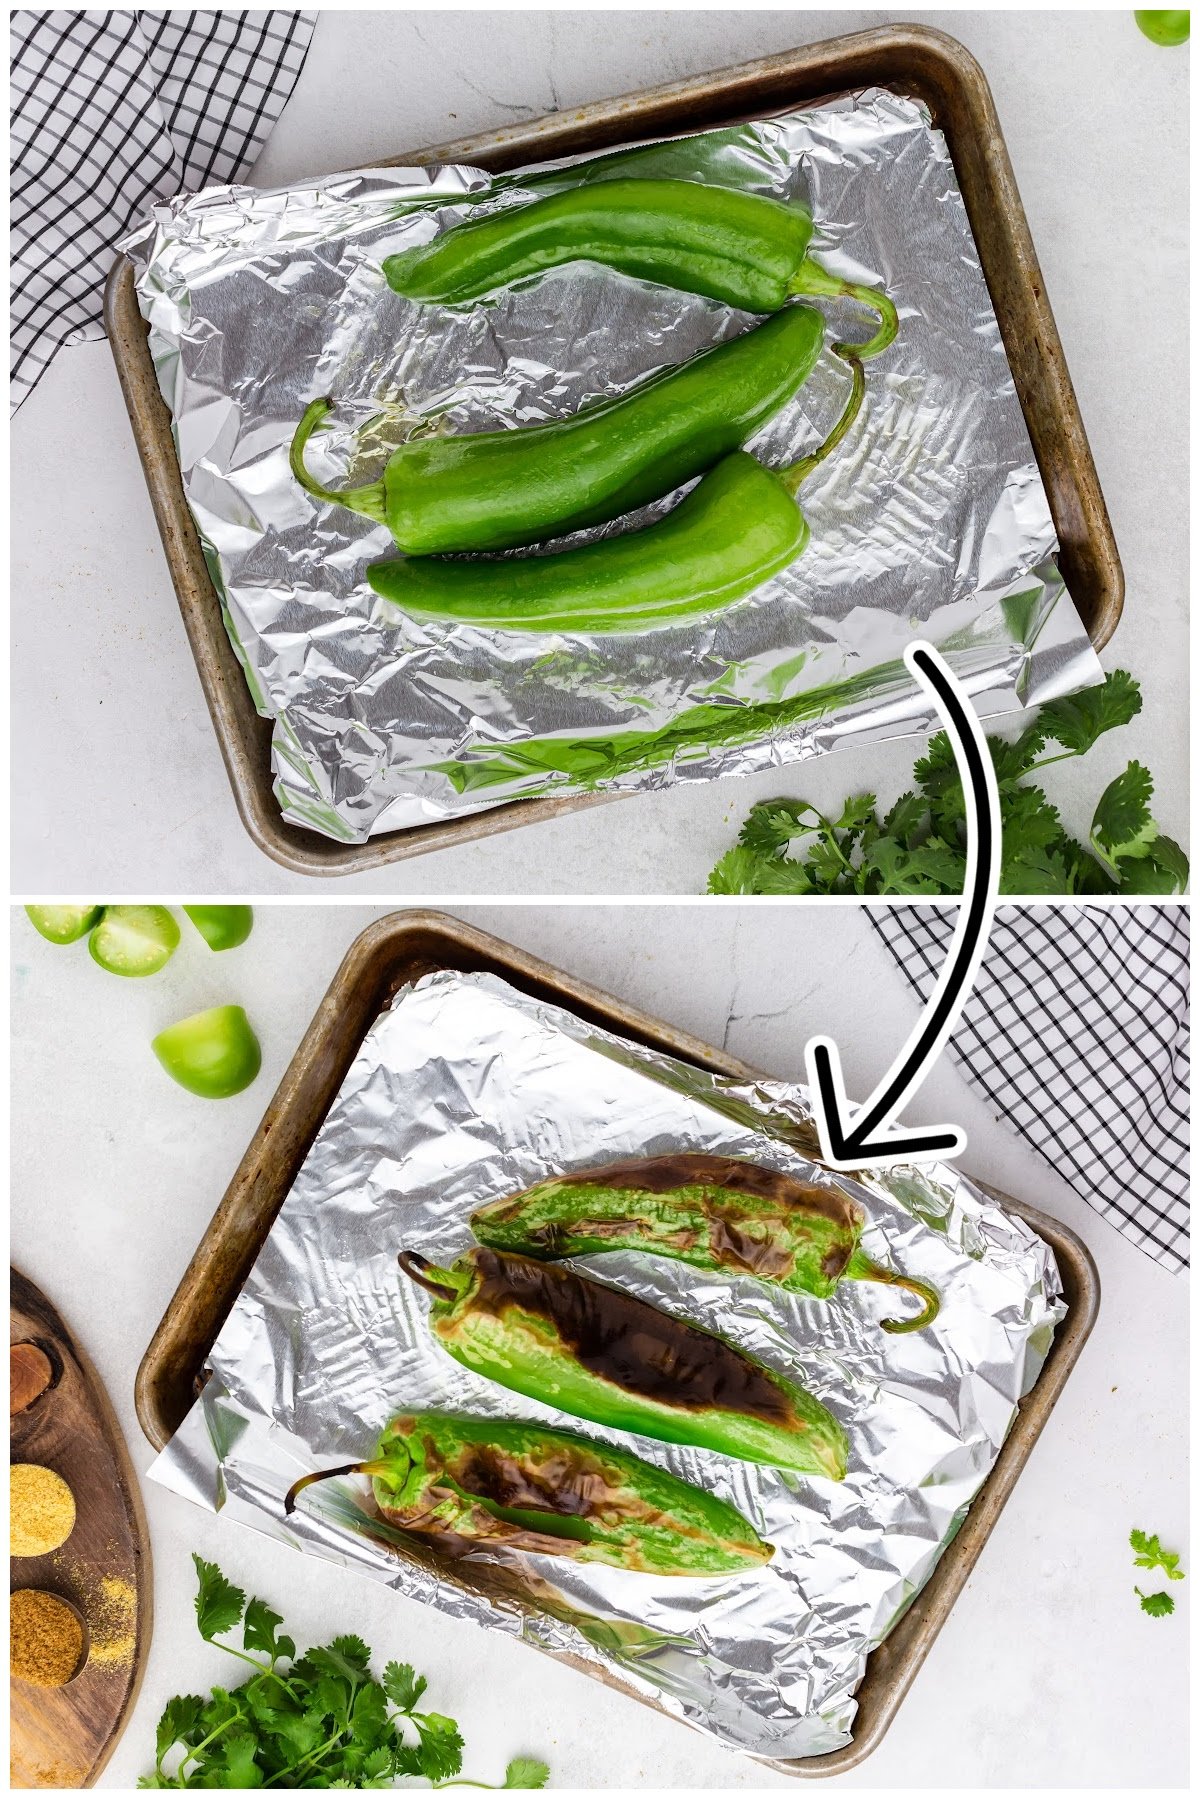 Two images of jalapenos on a cookie sheet before and after being baked.